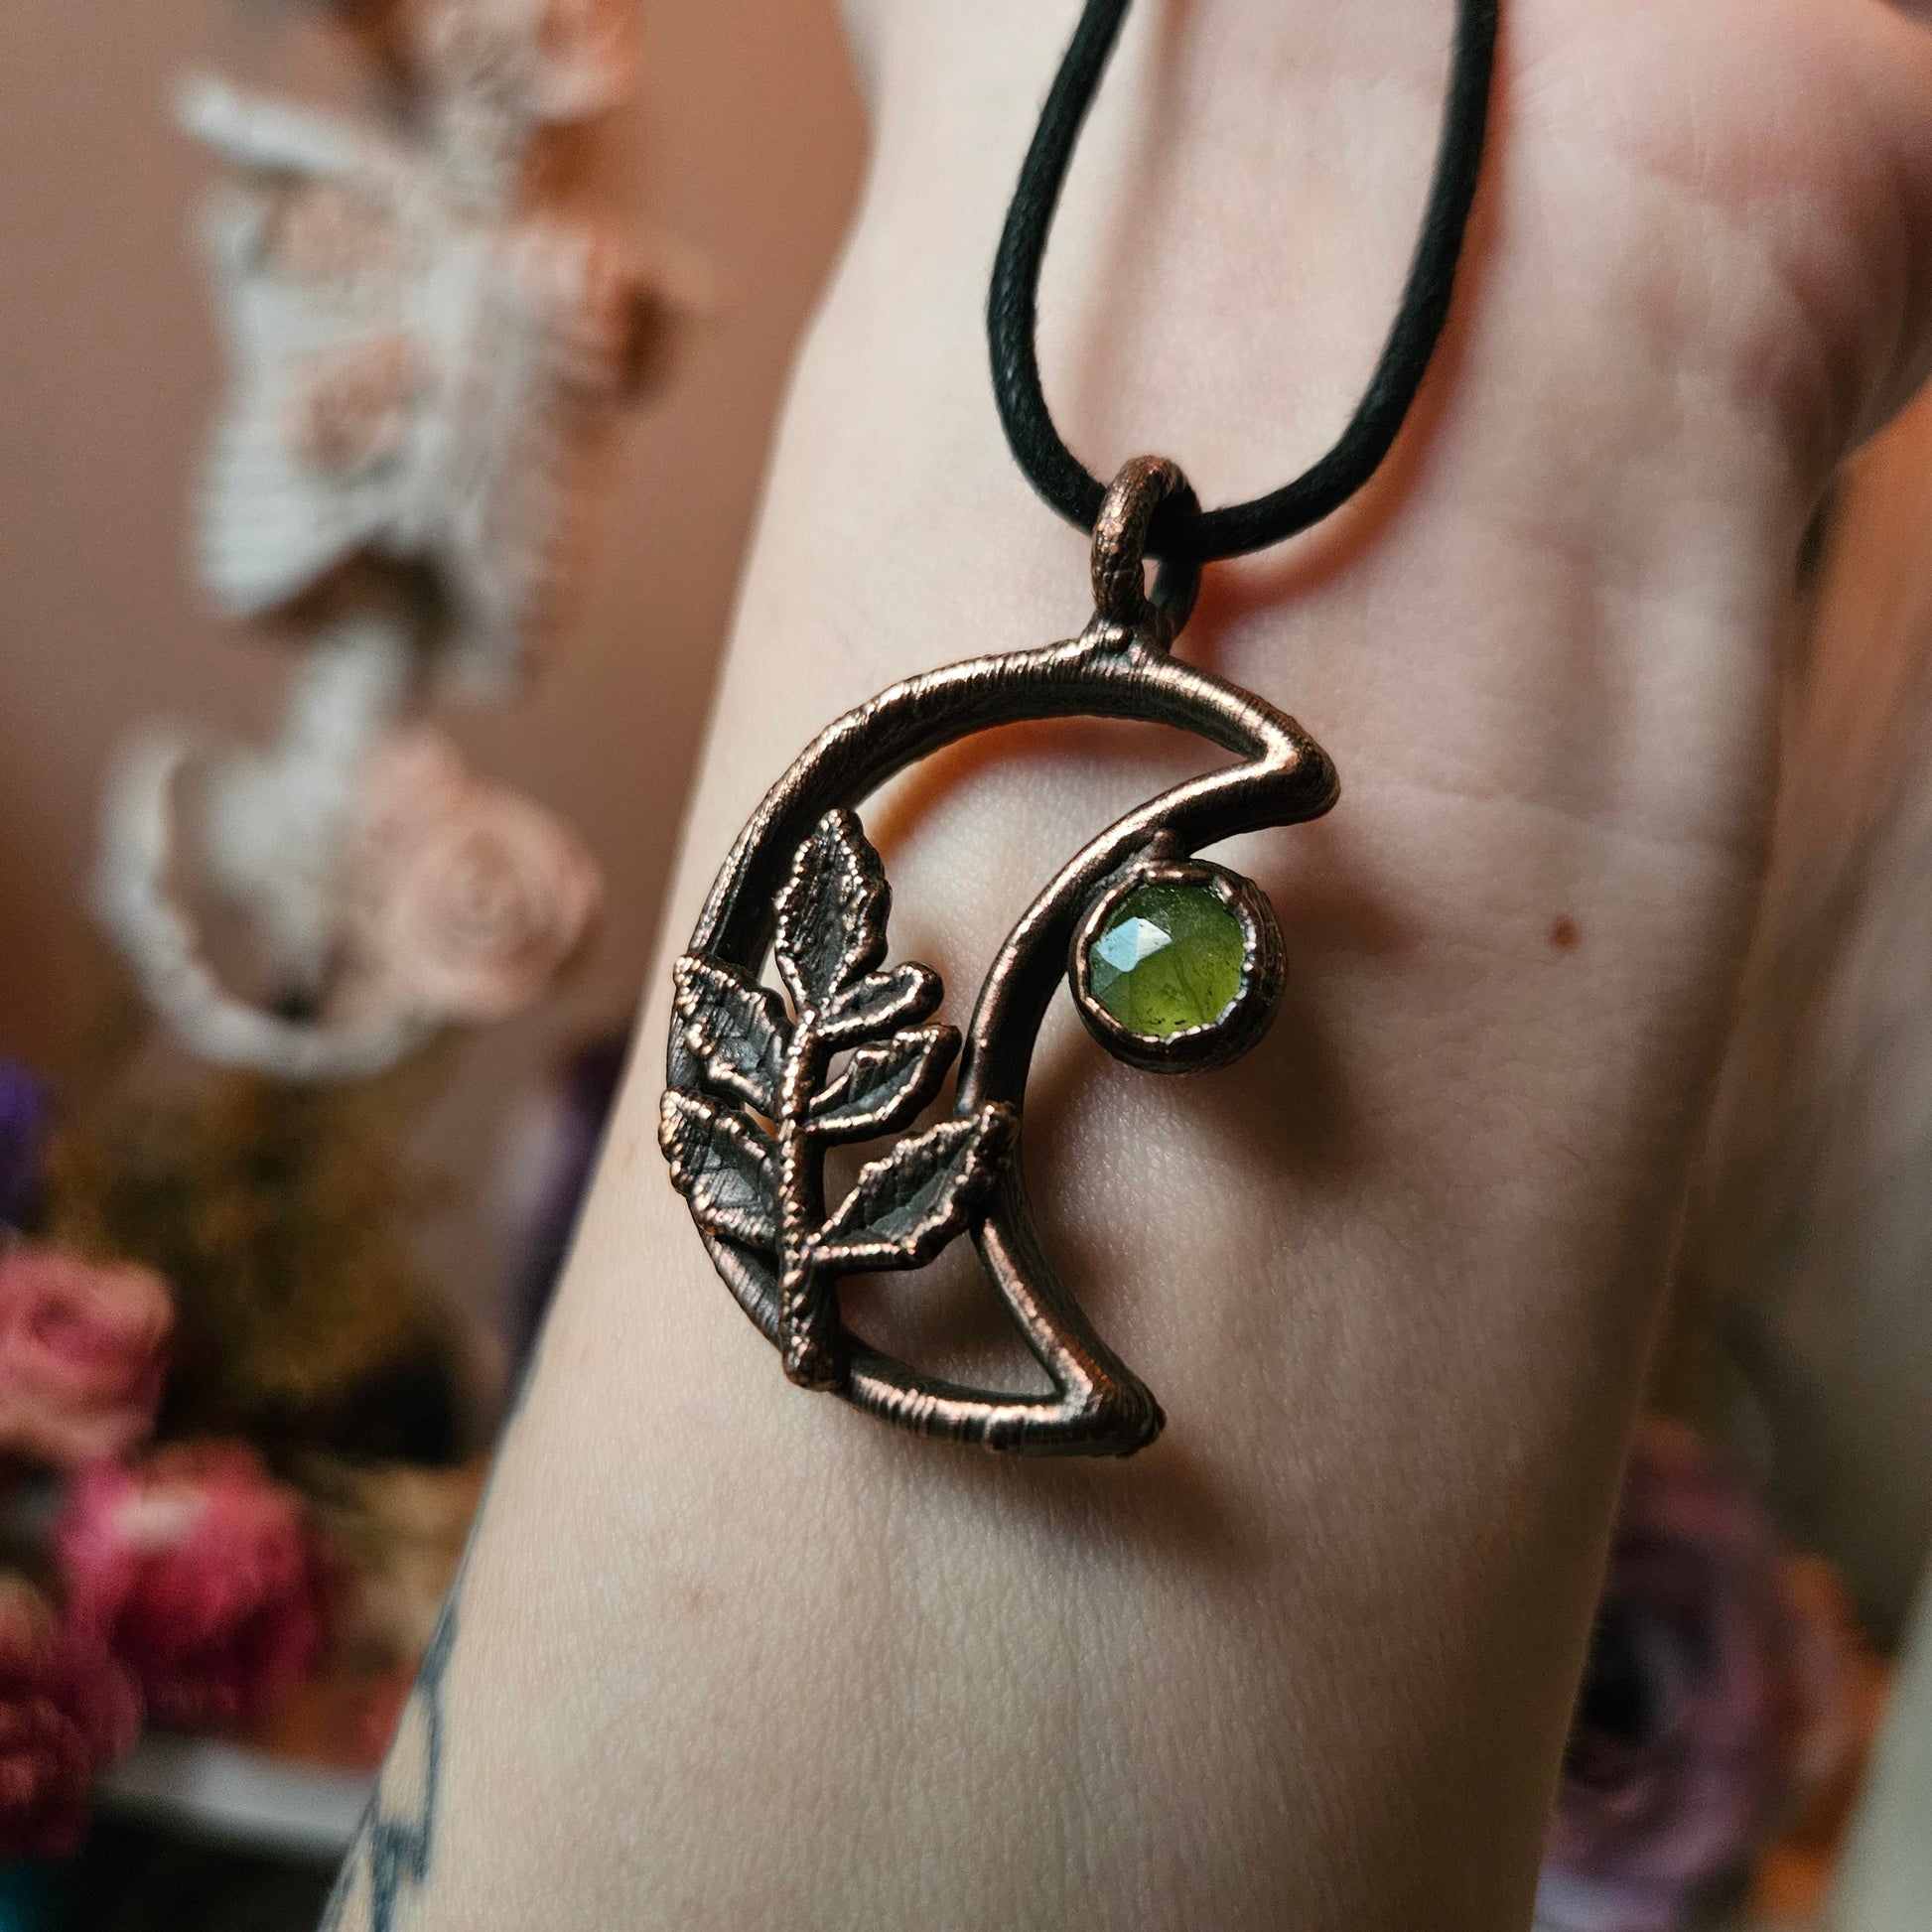 a woman’s hand holding a green stone pendant